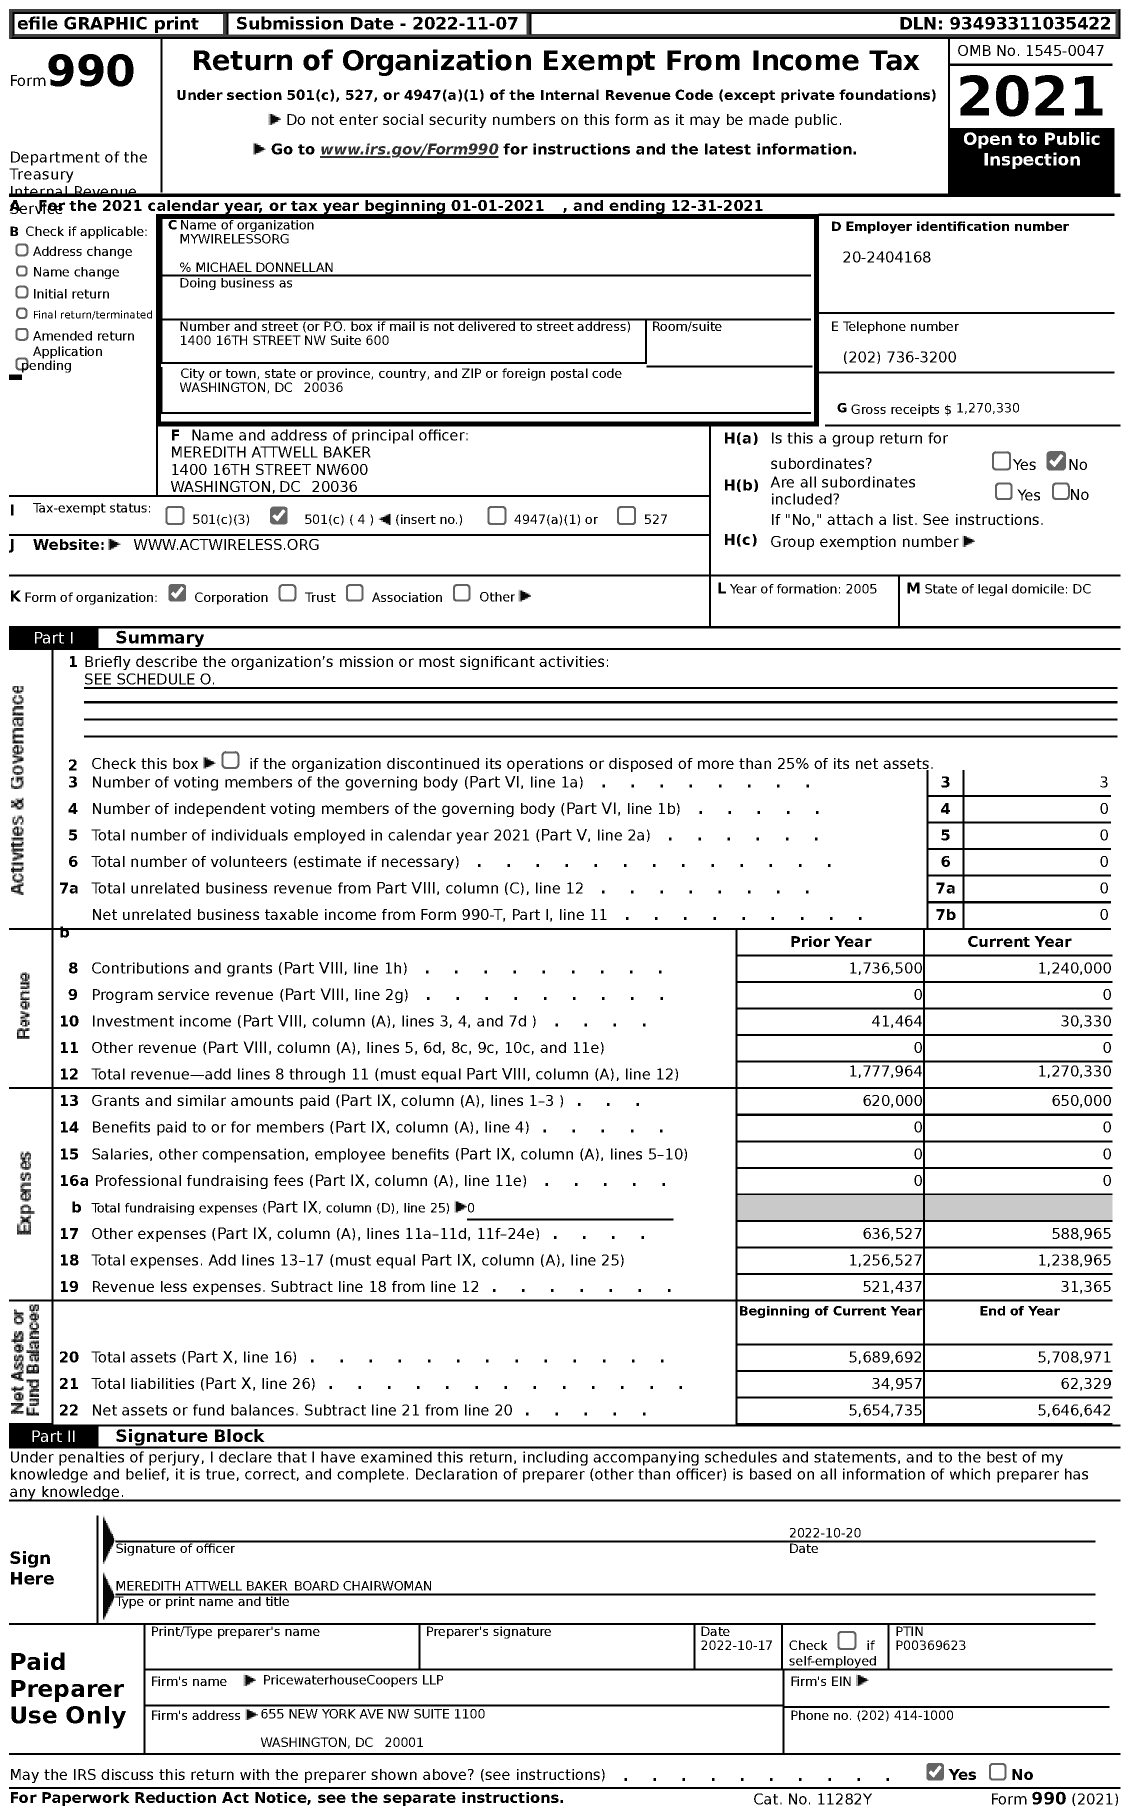 Image of first page of 2021 Form 990 for Mywirelessorg